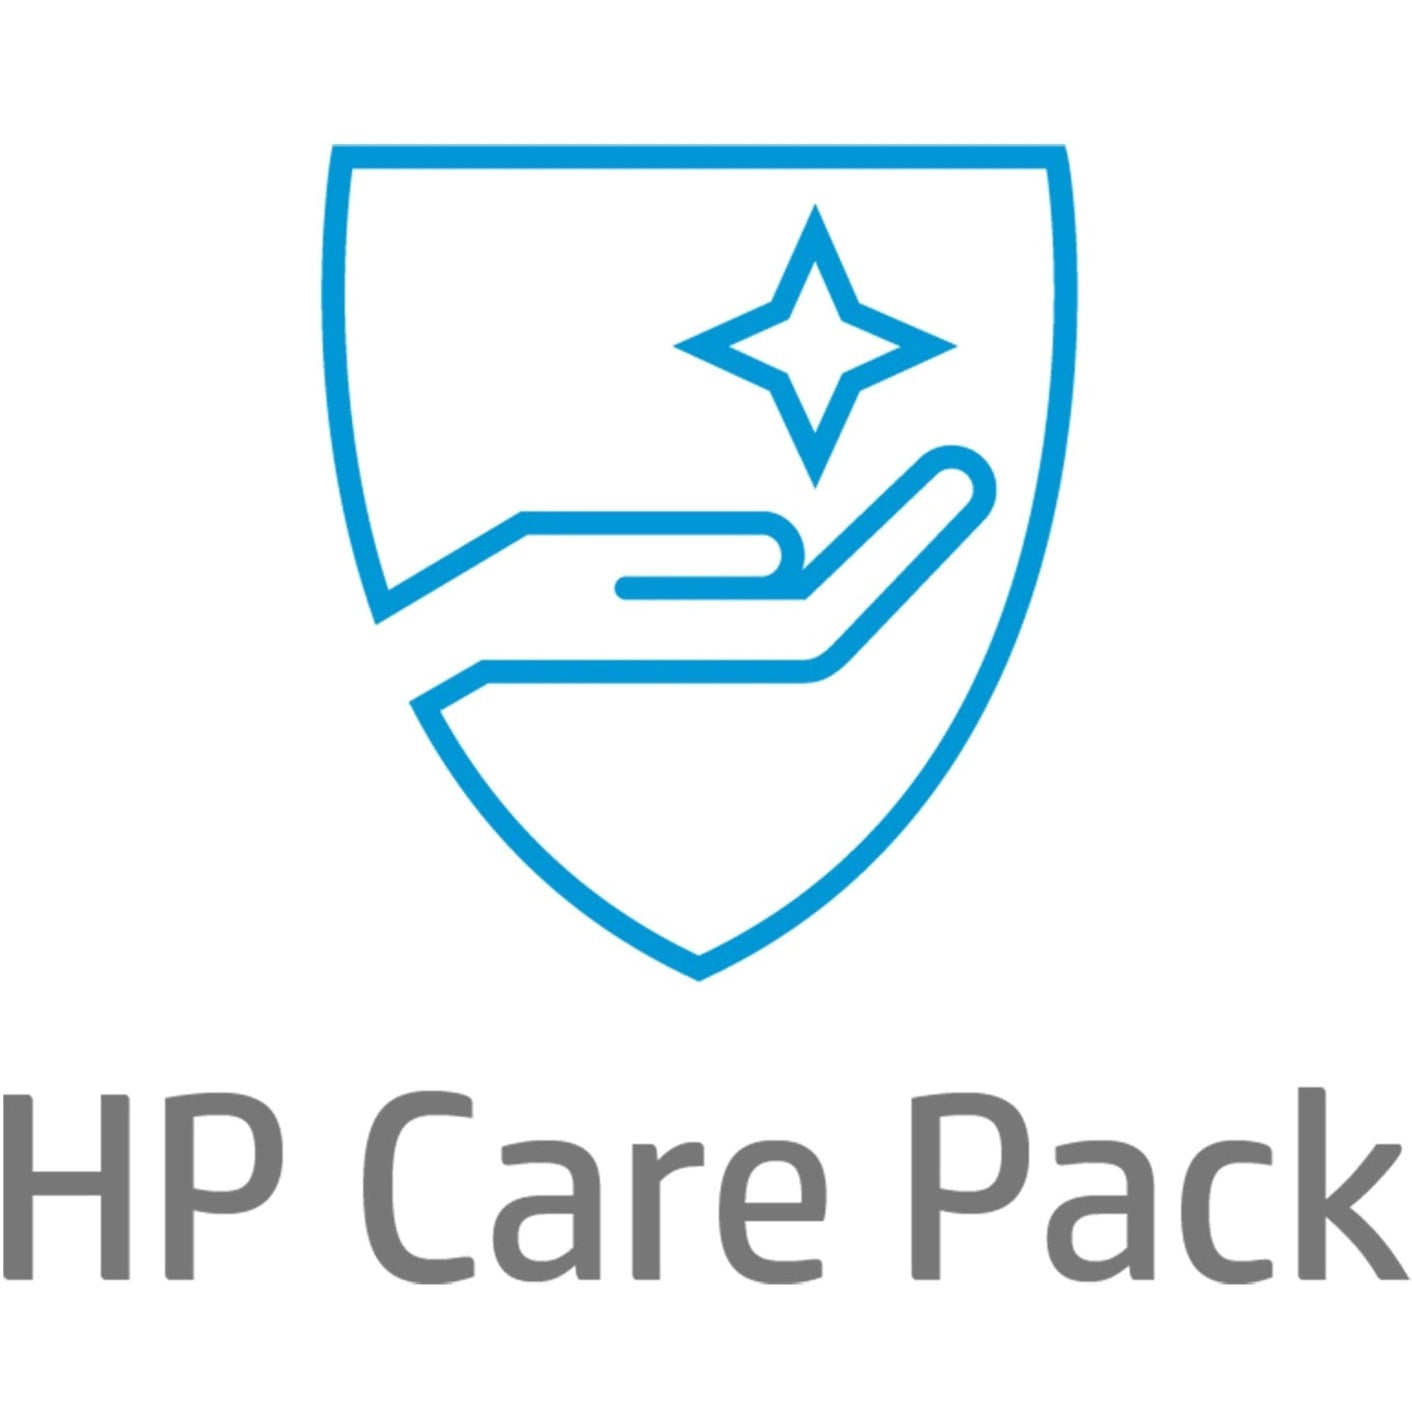 HP Care Pack - Extended Service - 3 Year - Service (U9MZ0E)